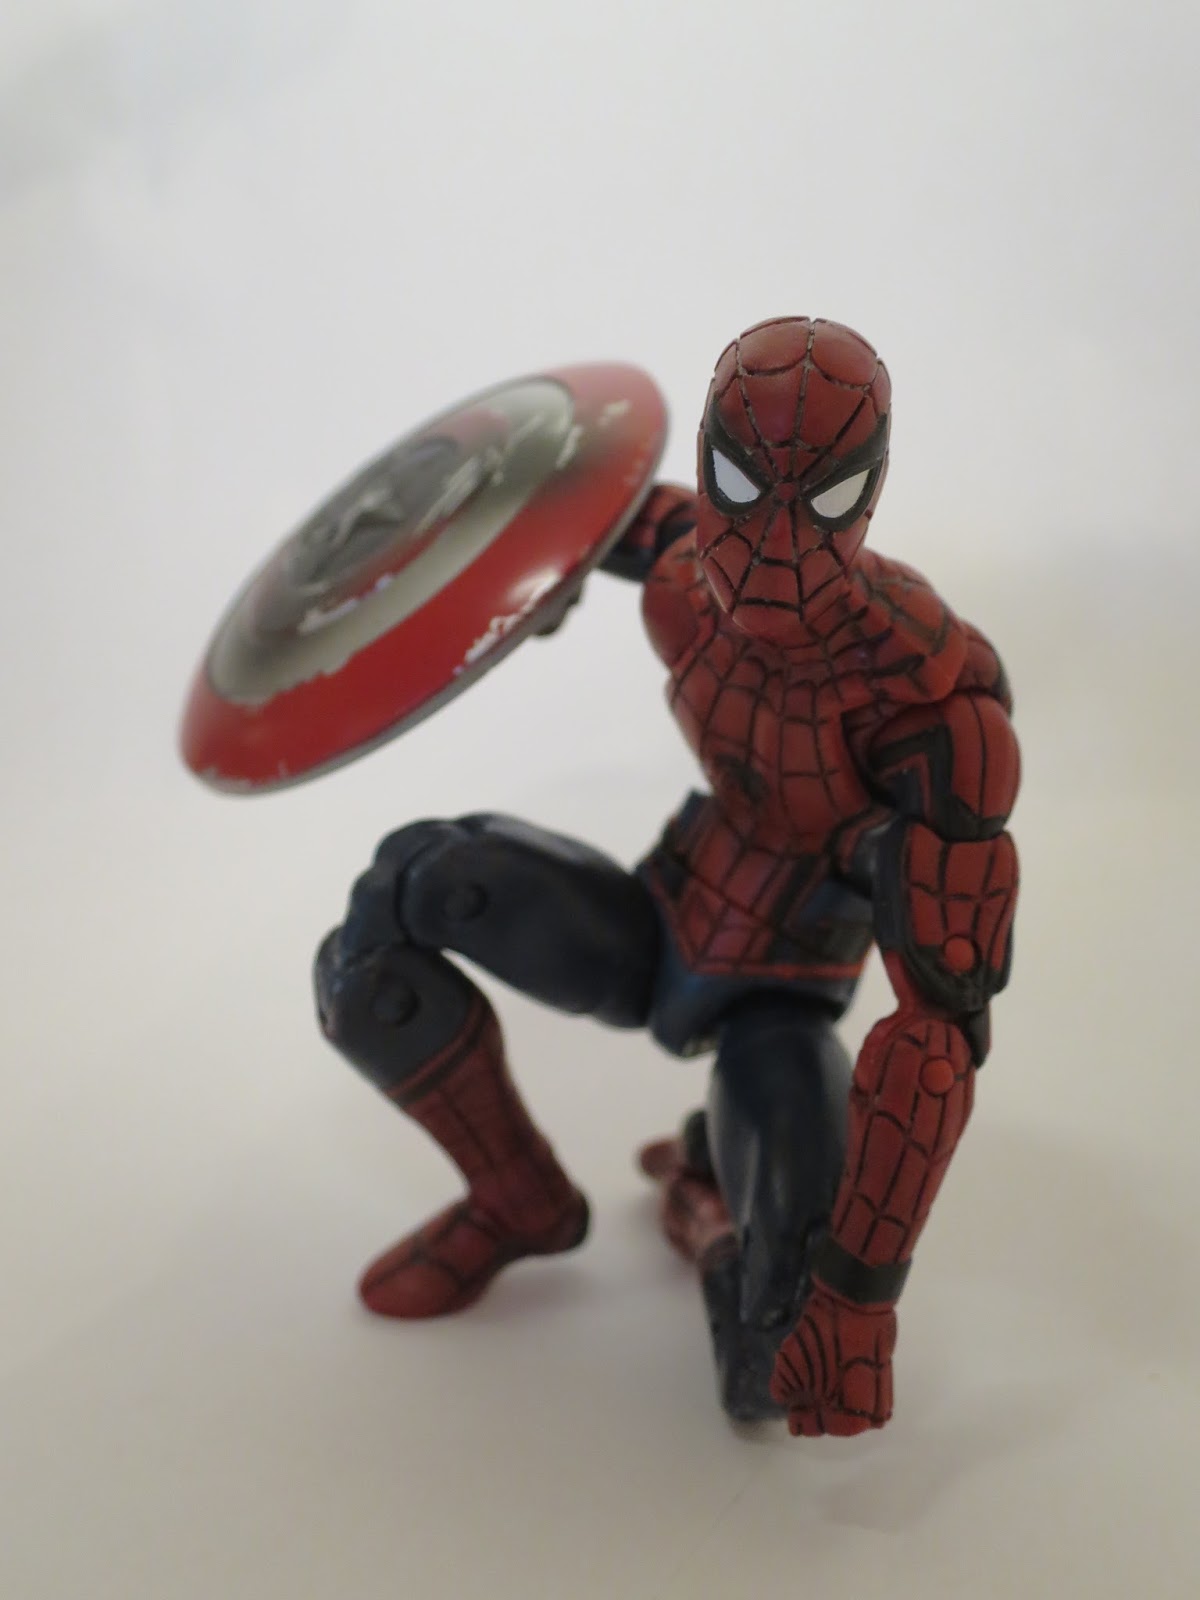 SpideyWeb's Realm of Toys: Toy Review - Marvel Legends Captain America Civil  War 3-Pack Spider-Man